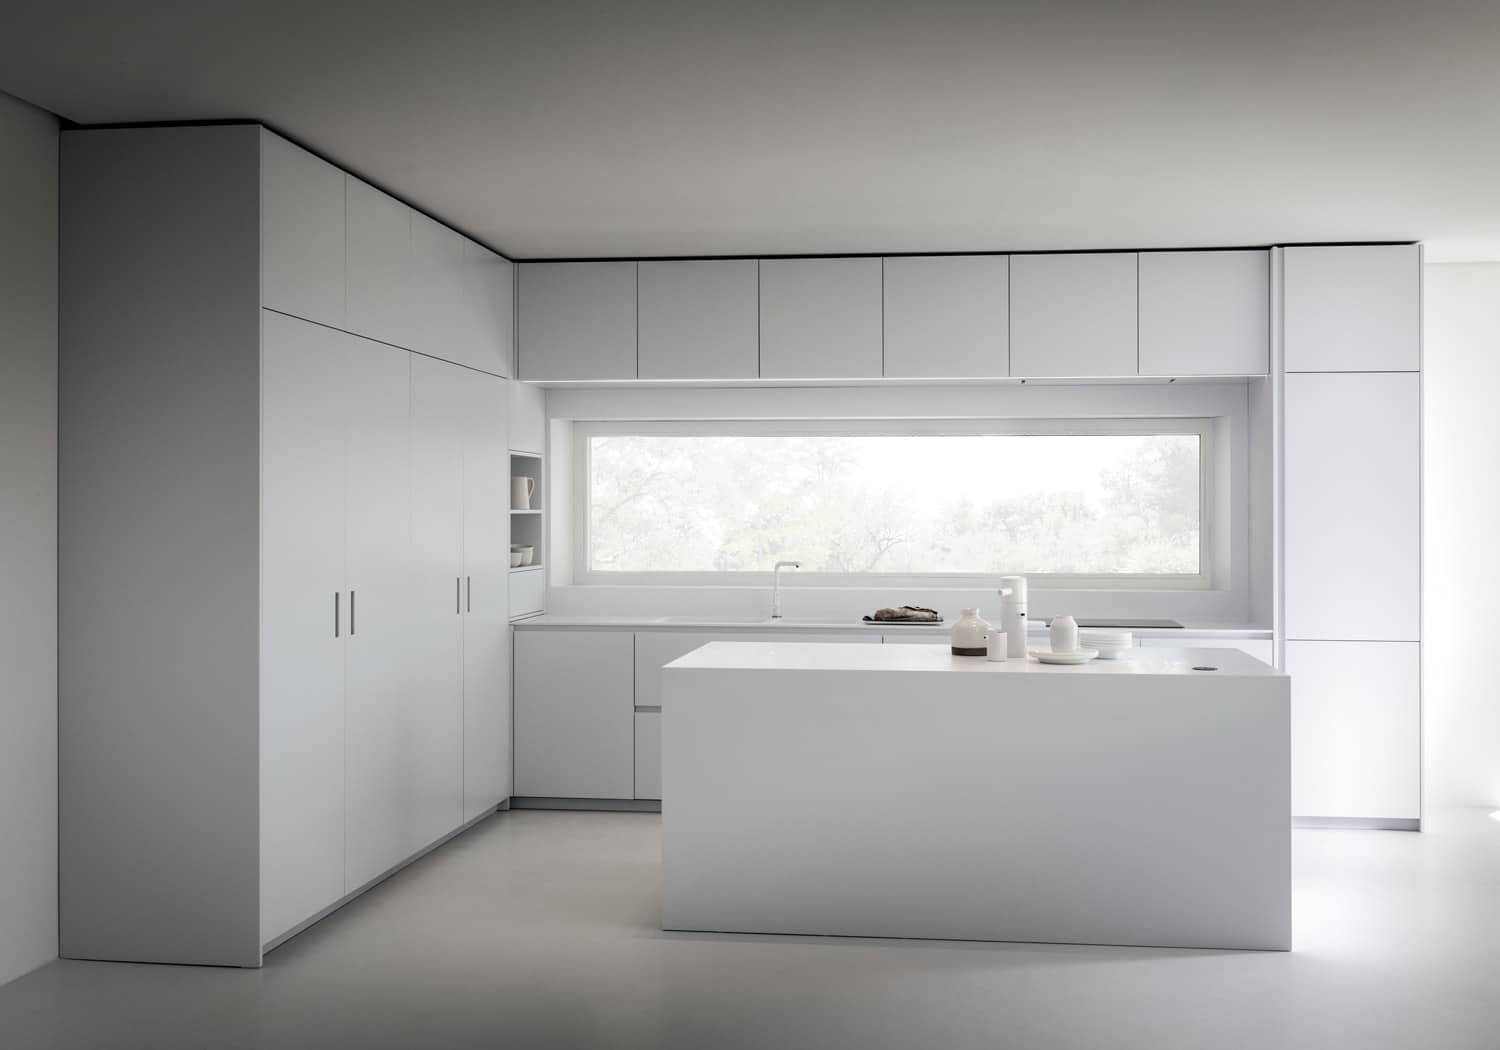 Cabinet doors are in RAL9003 White matte lacquer. Designer White Corian was used for countertops, island, and the frame around the window. 